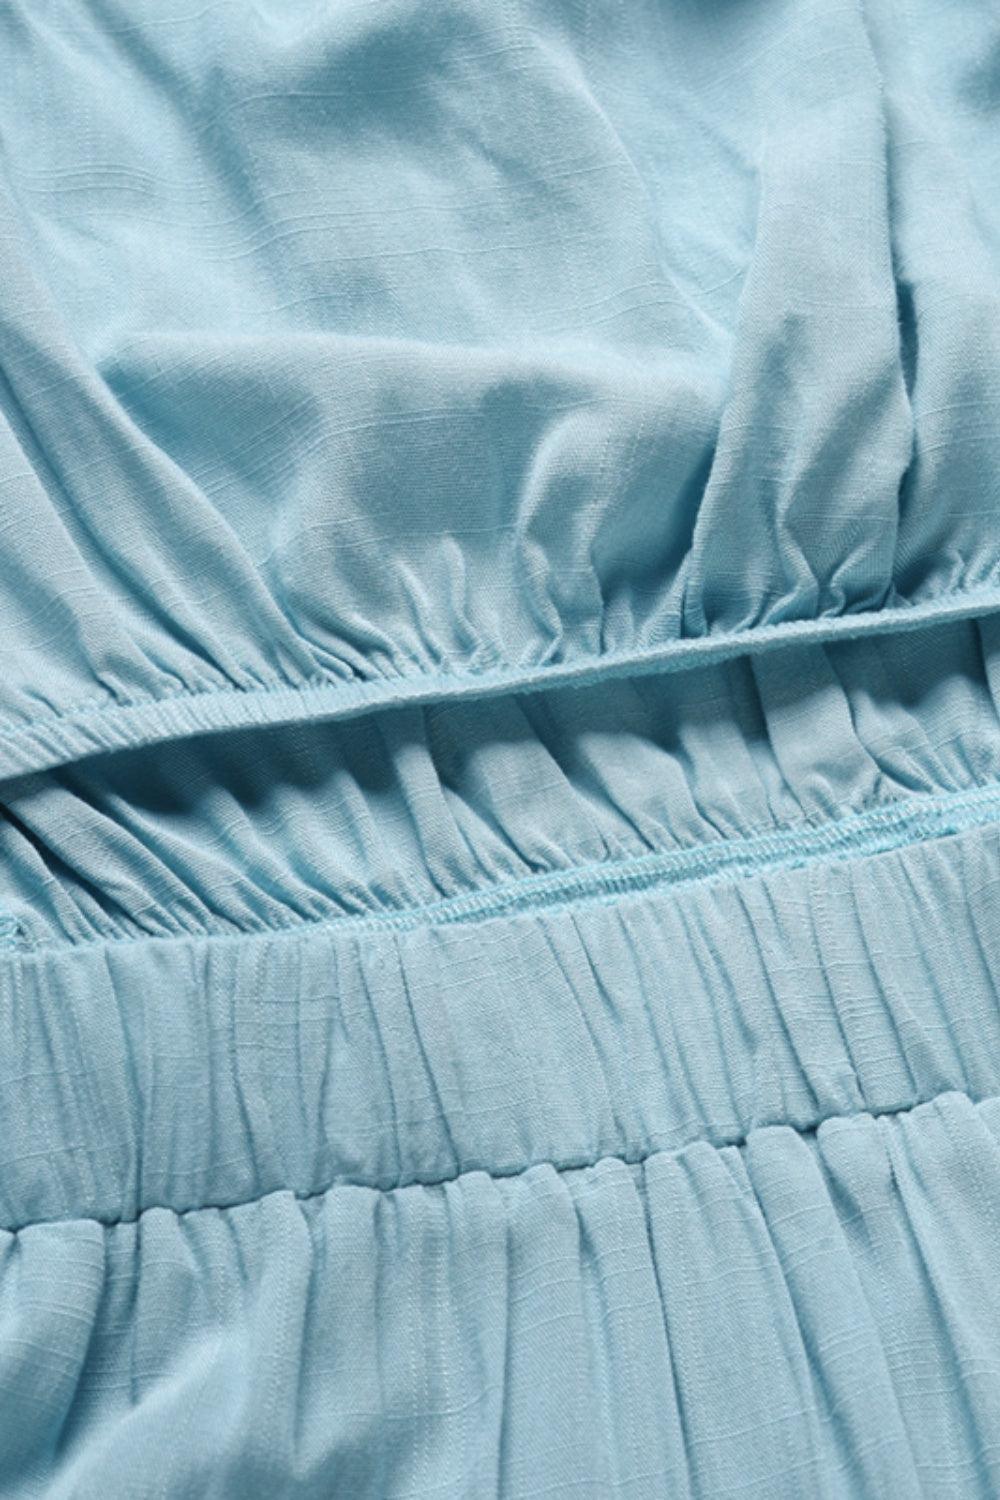 a close up of a blue dress with ruffles